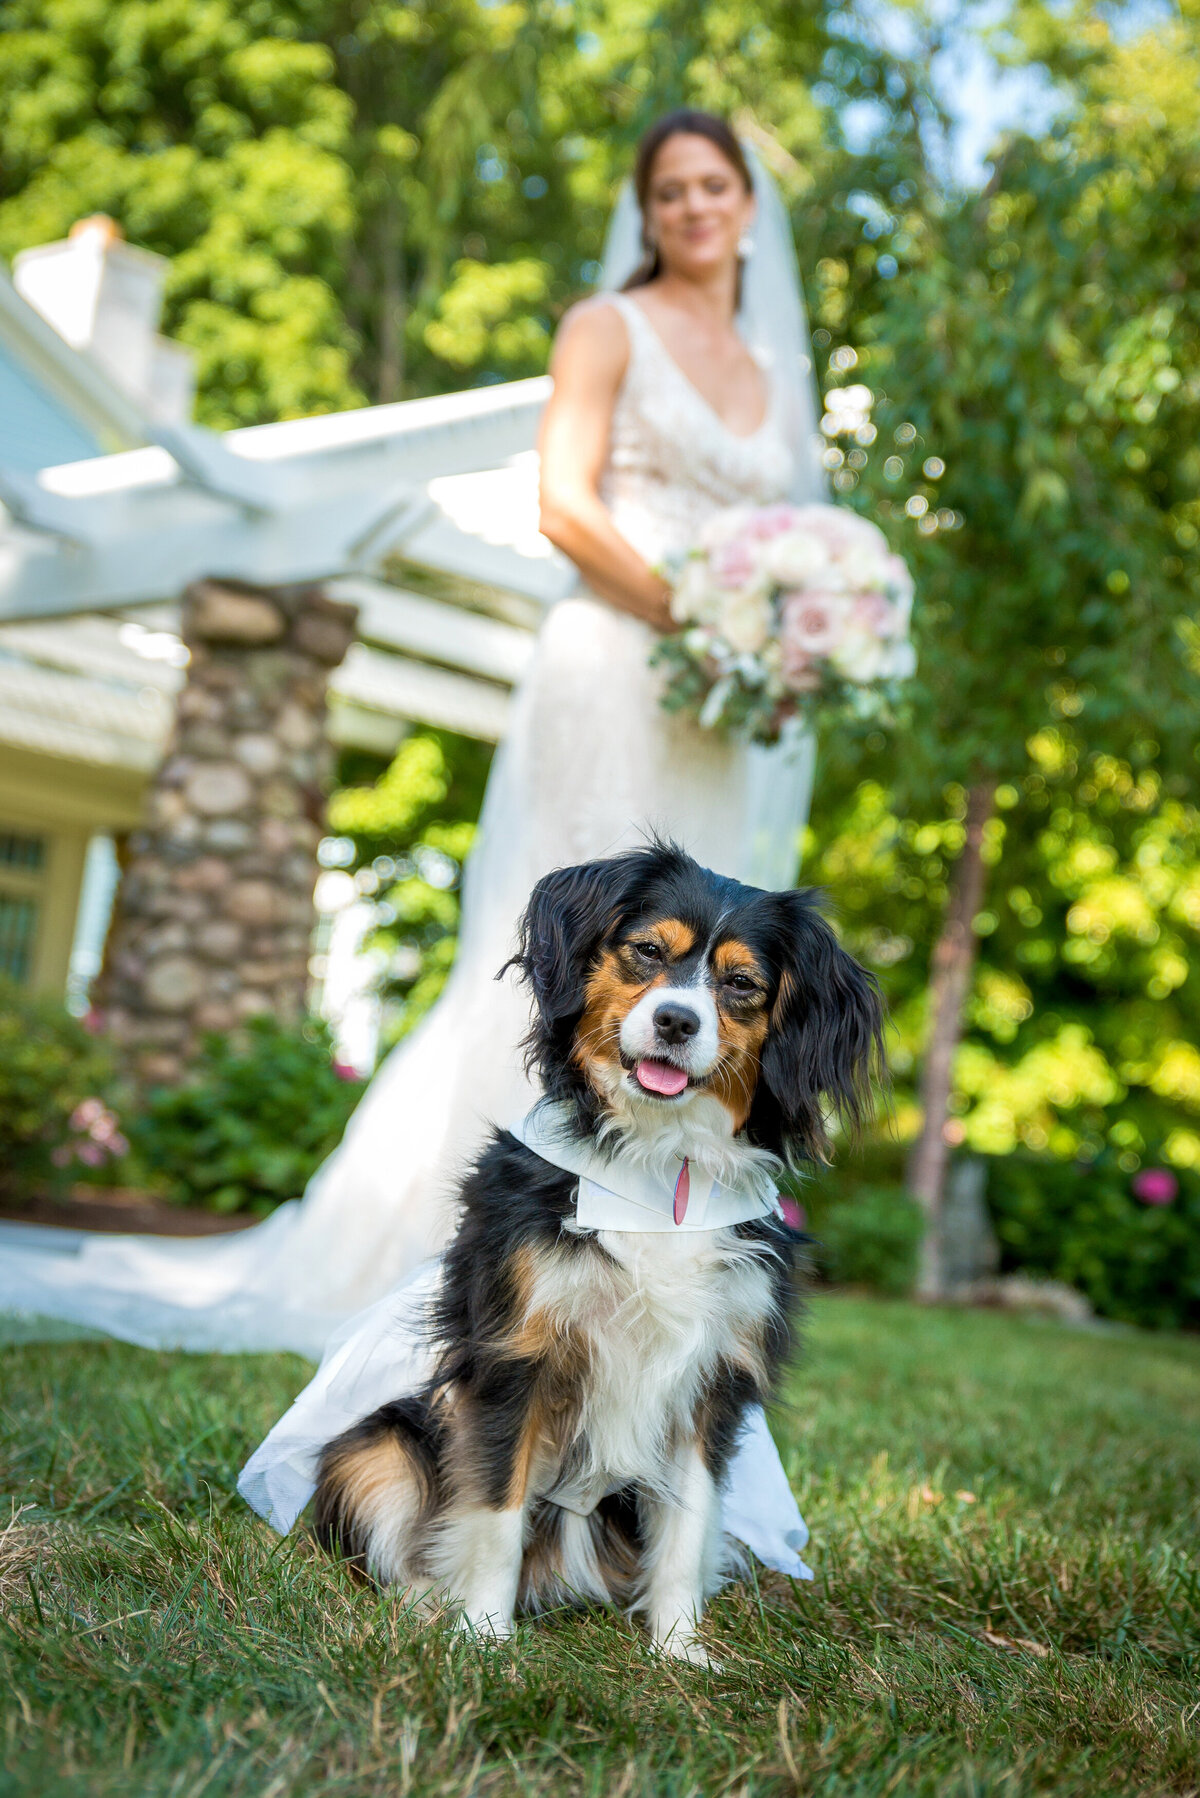 Bride with her dog wearing a wedding dress.